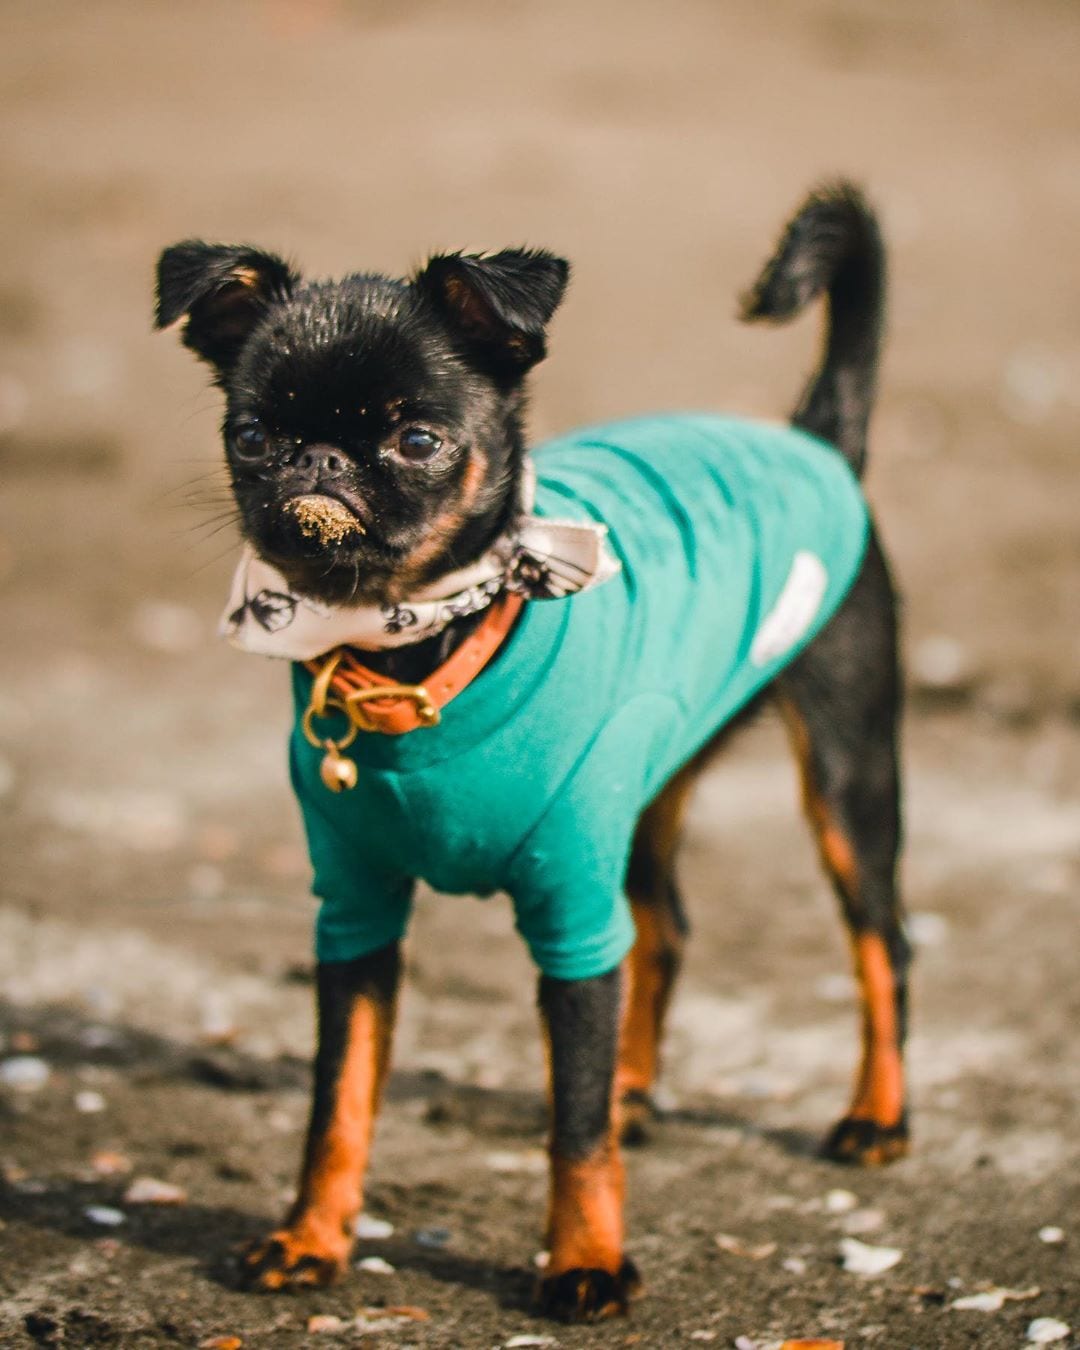 A Brussels Griffon wearing a green shirt while standing on the ground